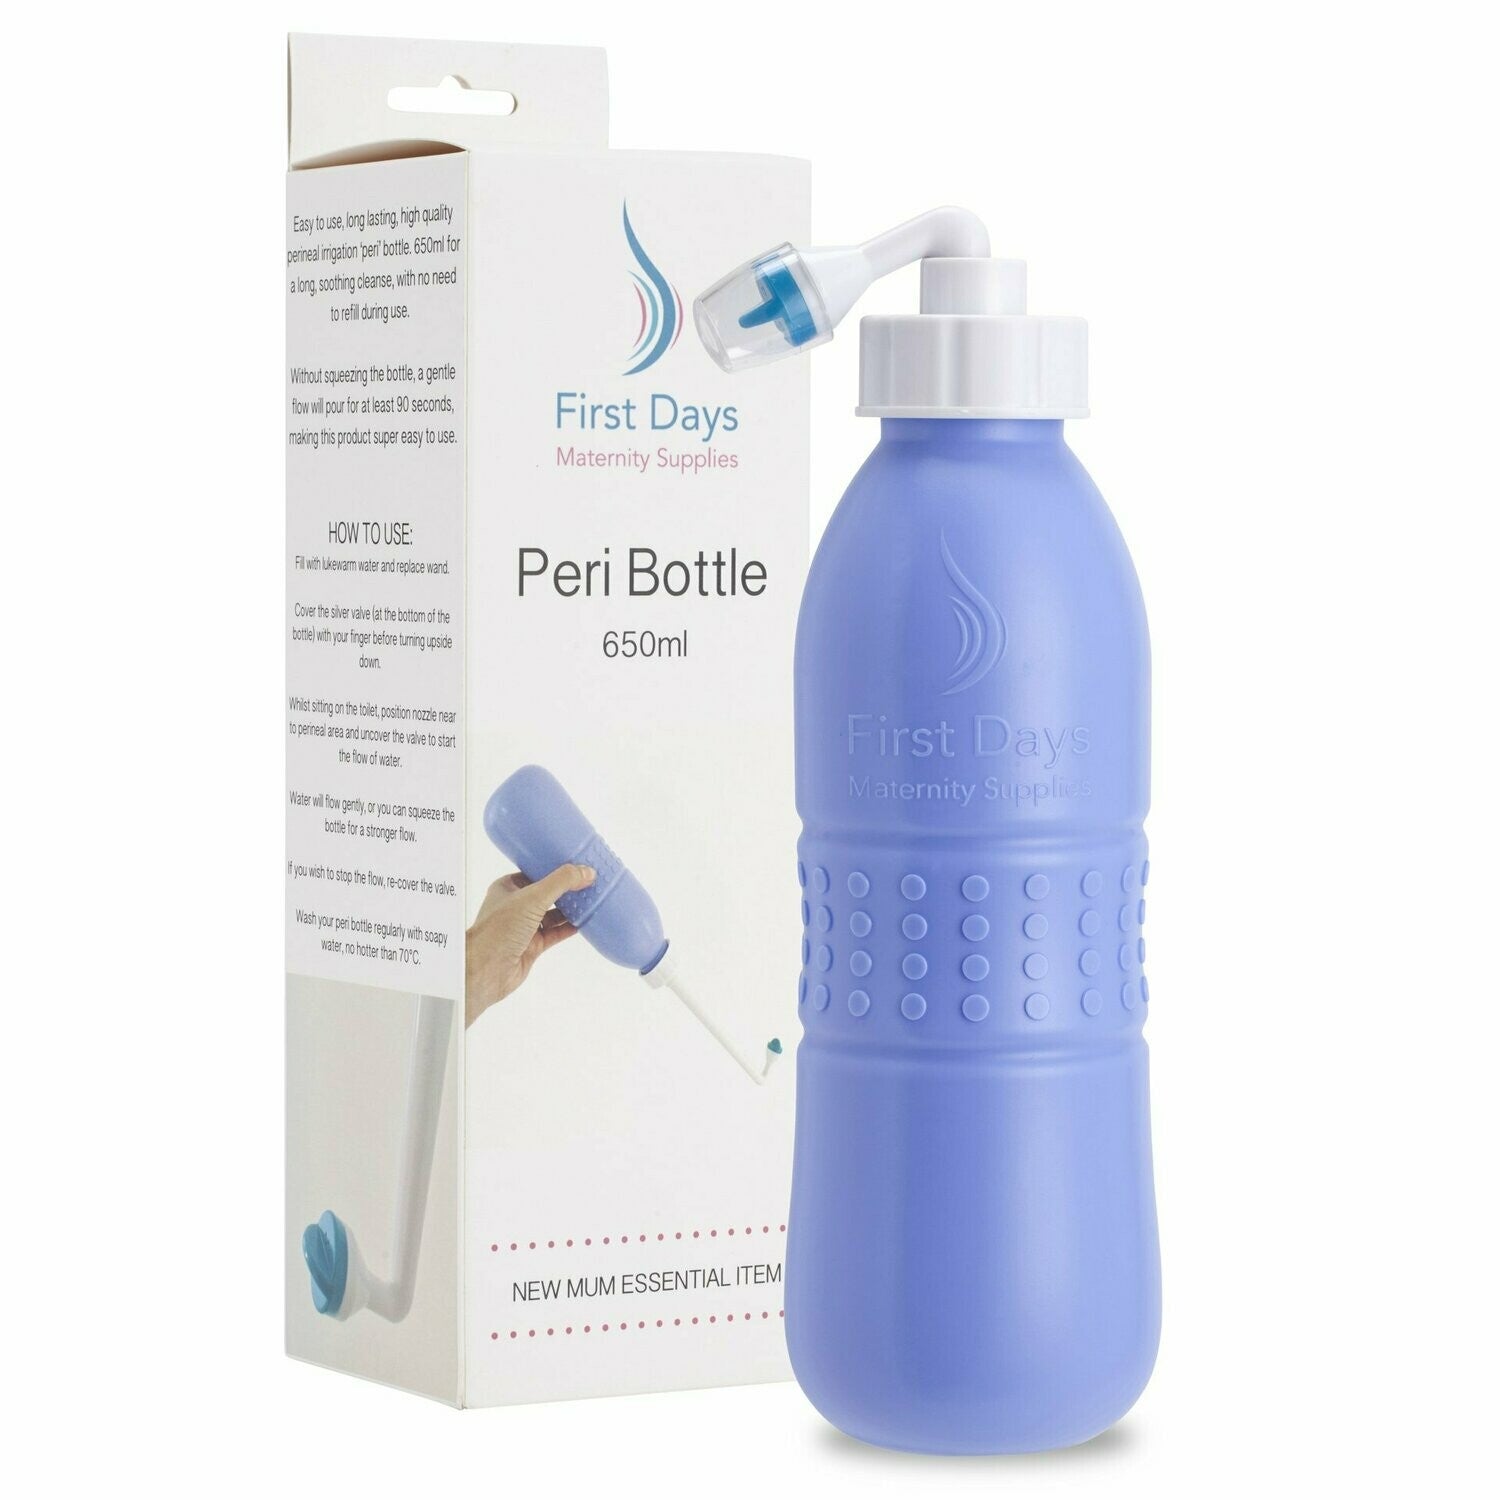 Peri Bottle for Postpartum Care,12 OZ Perineal Bottle Postpartum Essentials  Upside Down Peri Bottle for Perineal Recovery and Cleansing After Birth